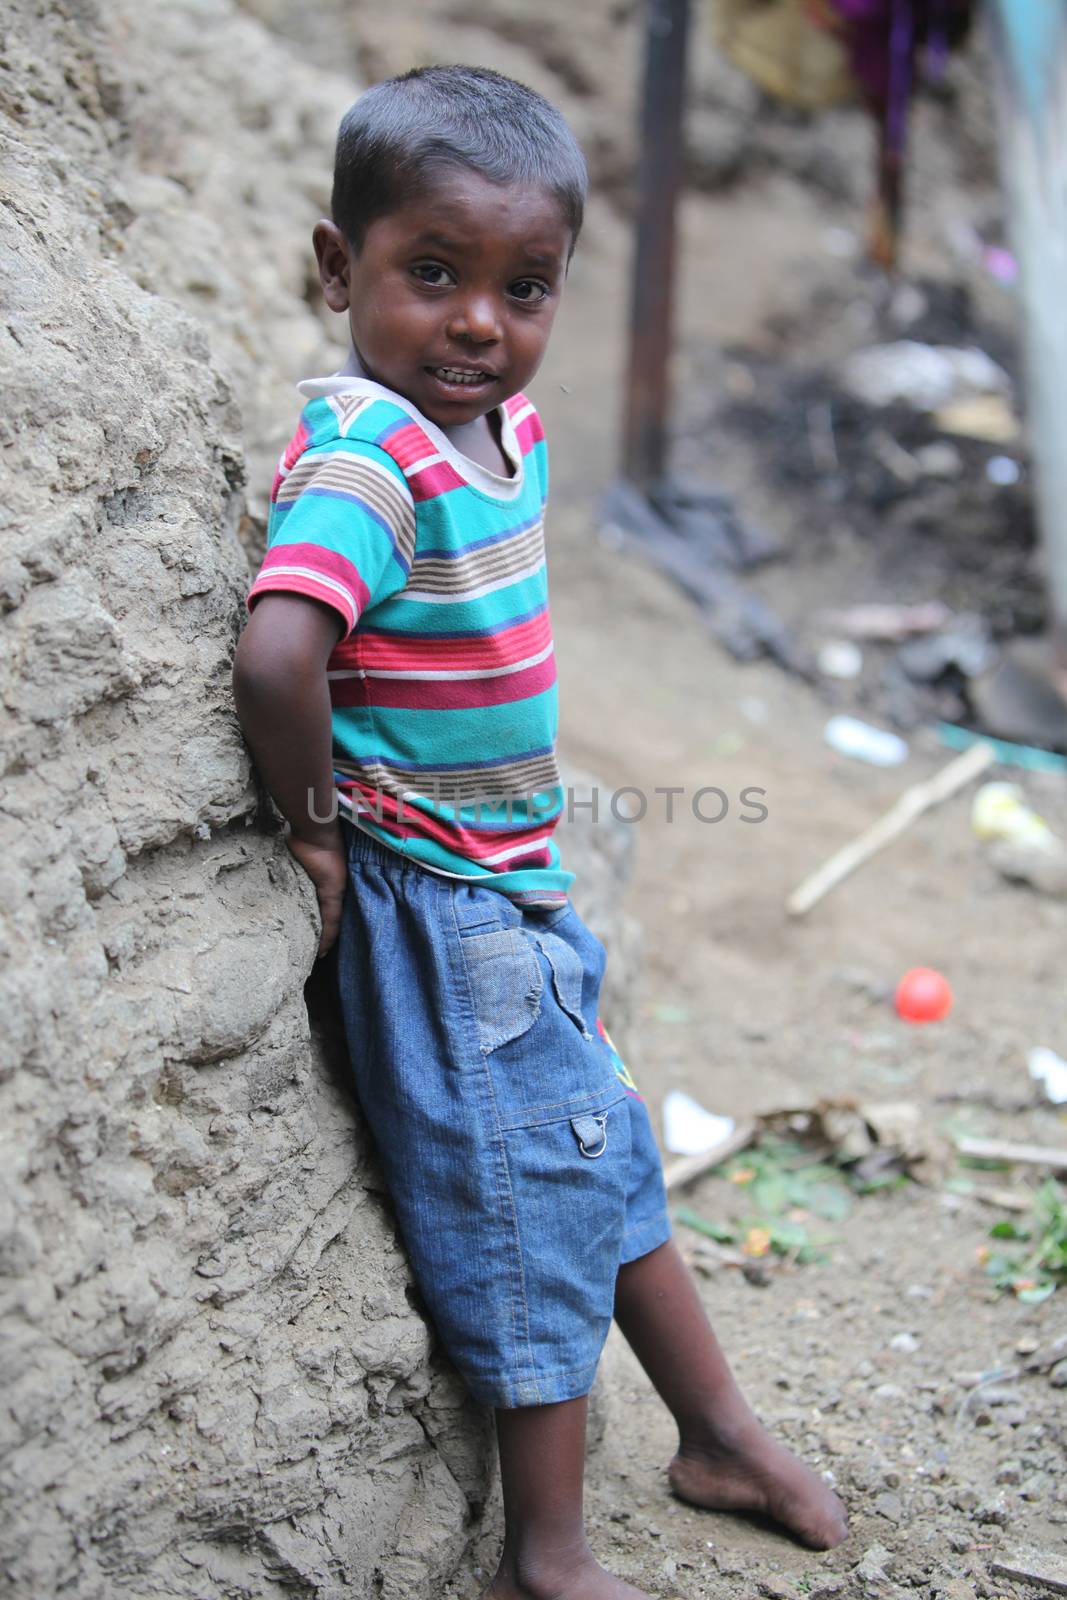 Pune, India - July 16, 2015: A poor Indian boy standing at a con by thefinalmiracle